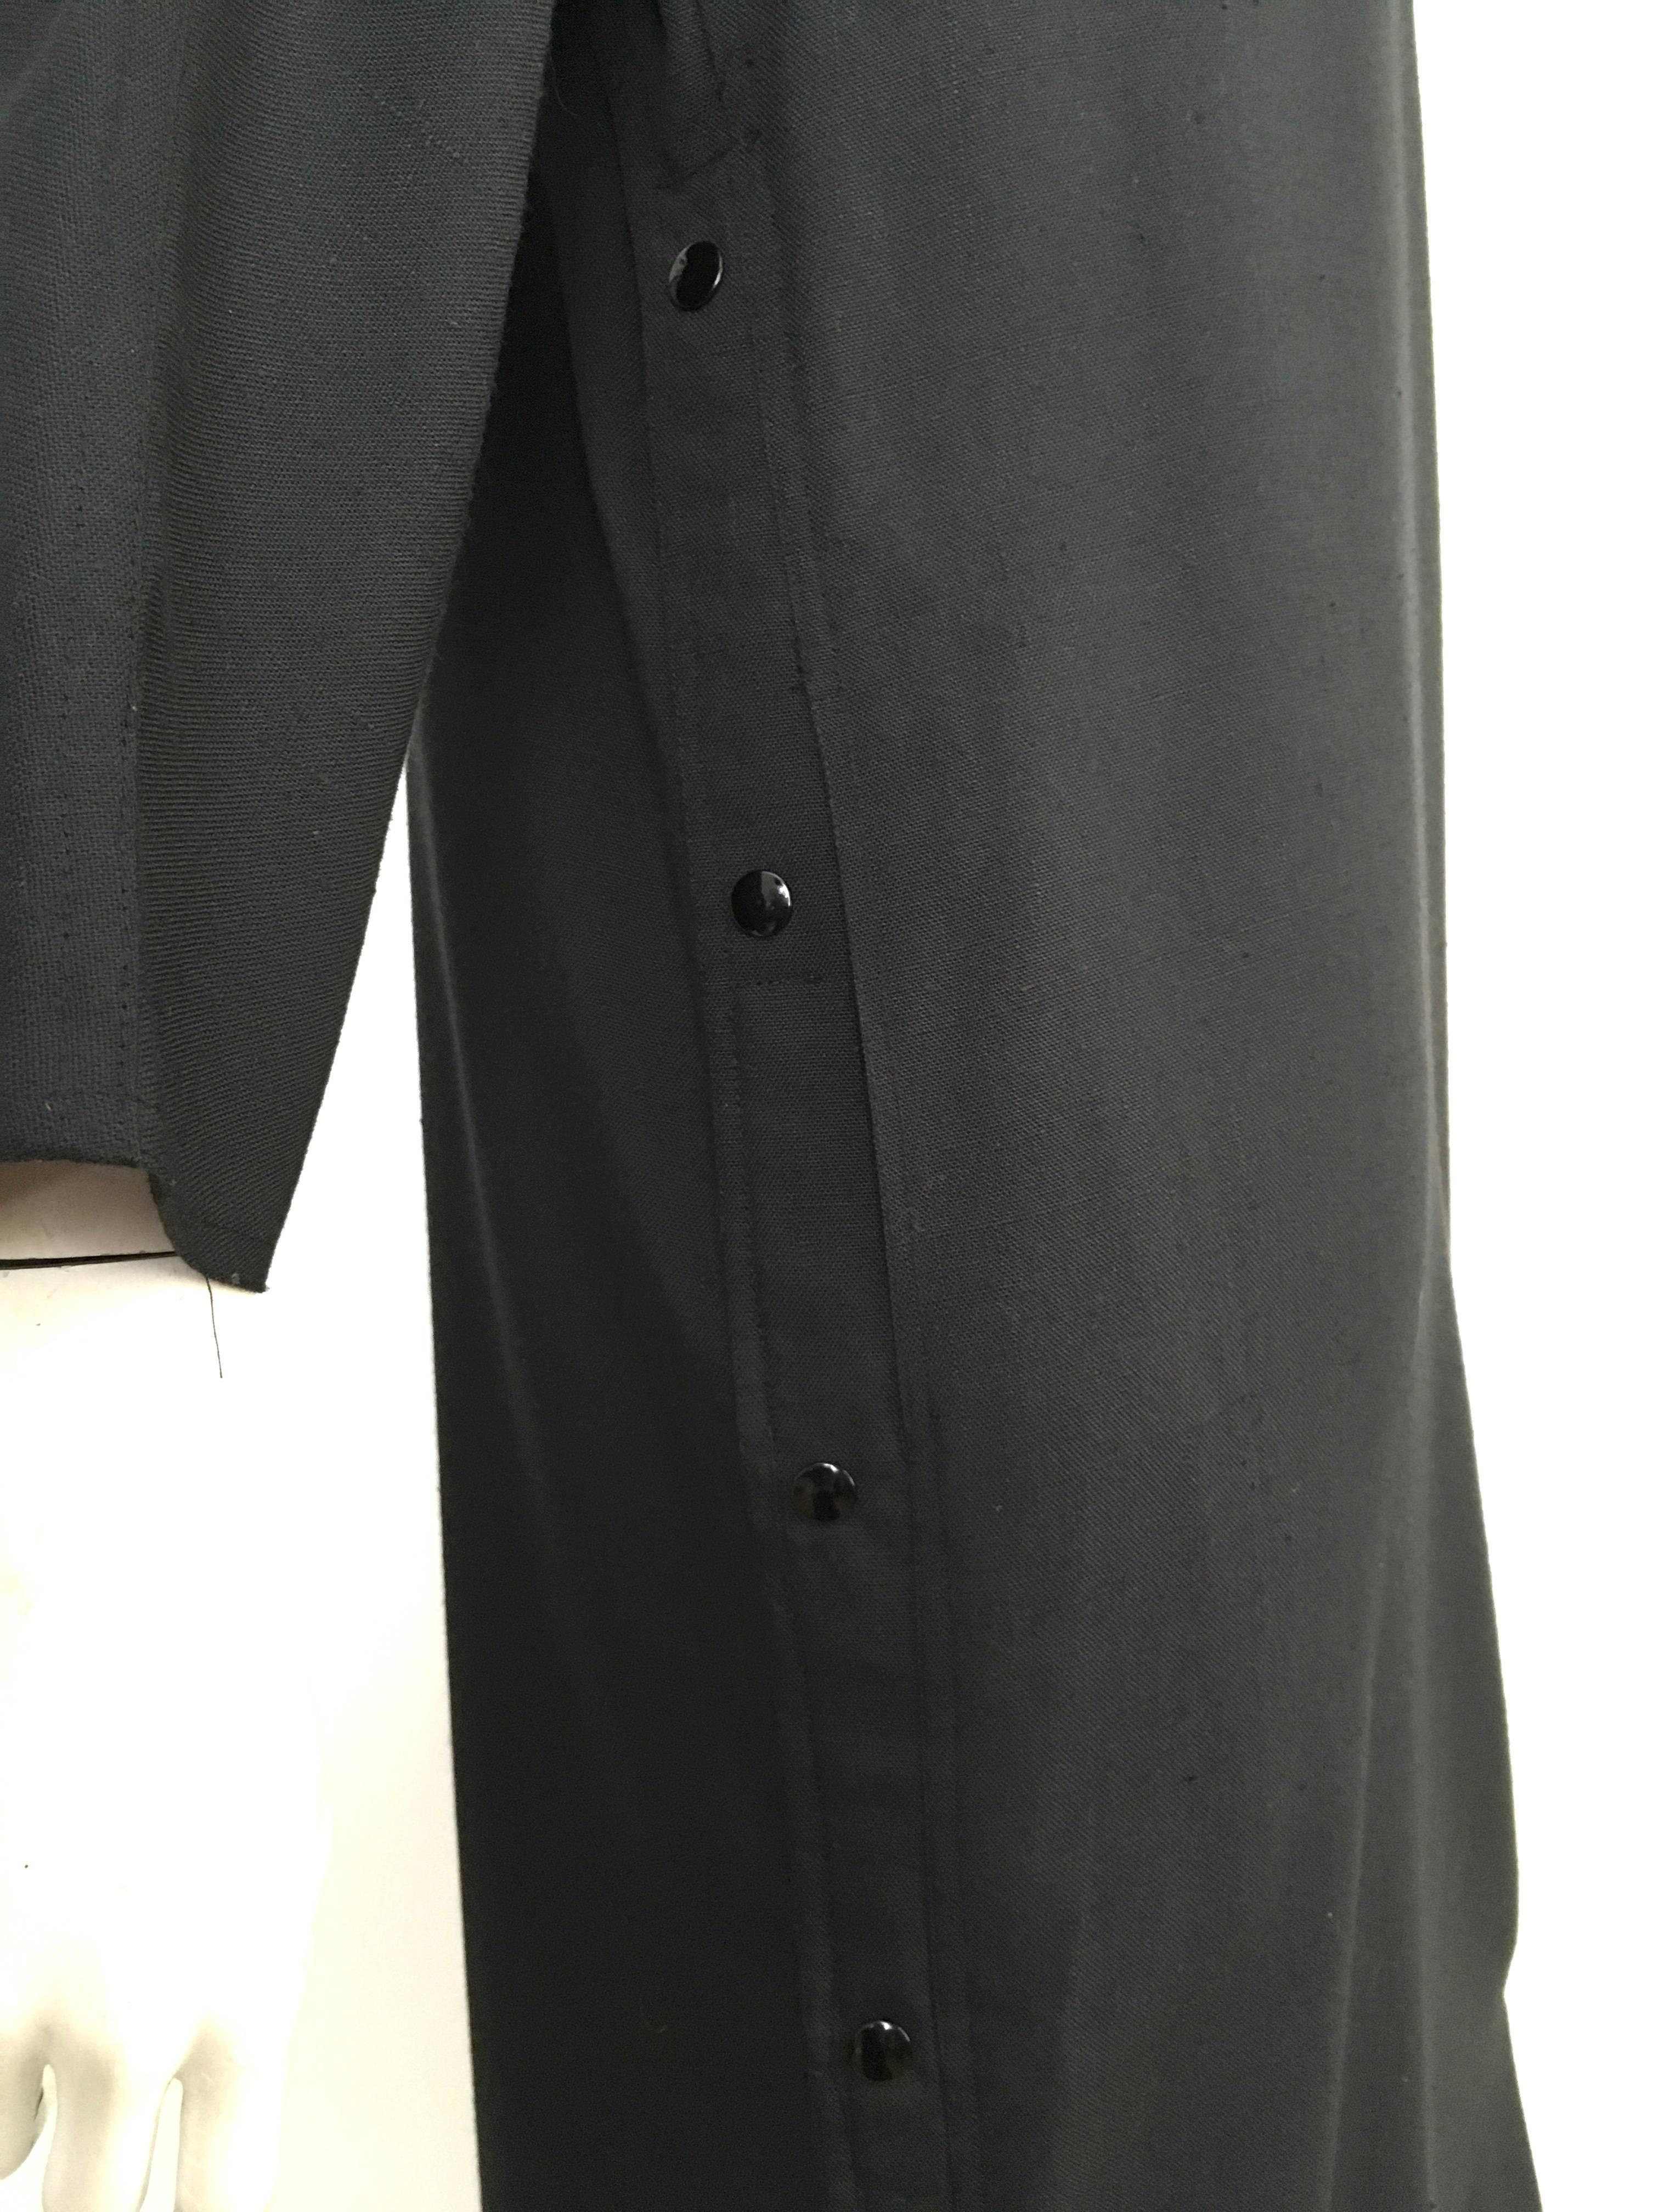 Geoffrey Beene Black Linen Dress With Pockets Size 12. In Excellent Condition For Sale In Atlanta, GA